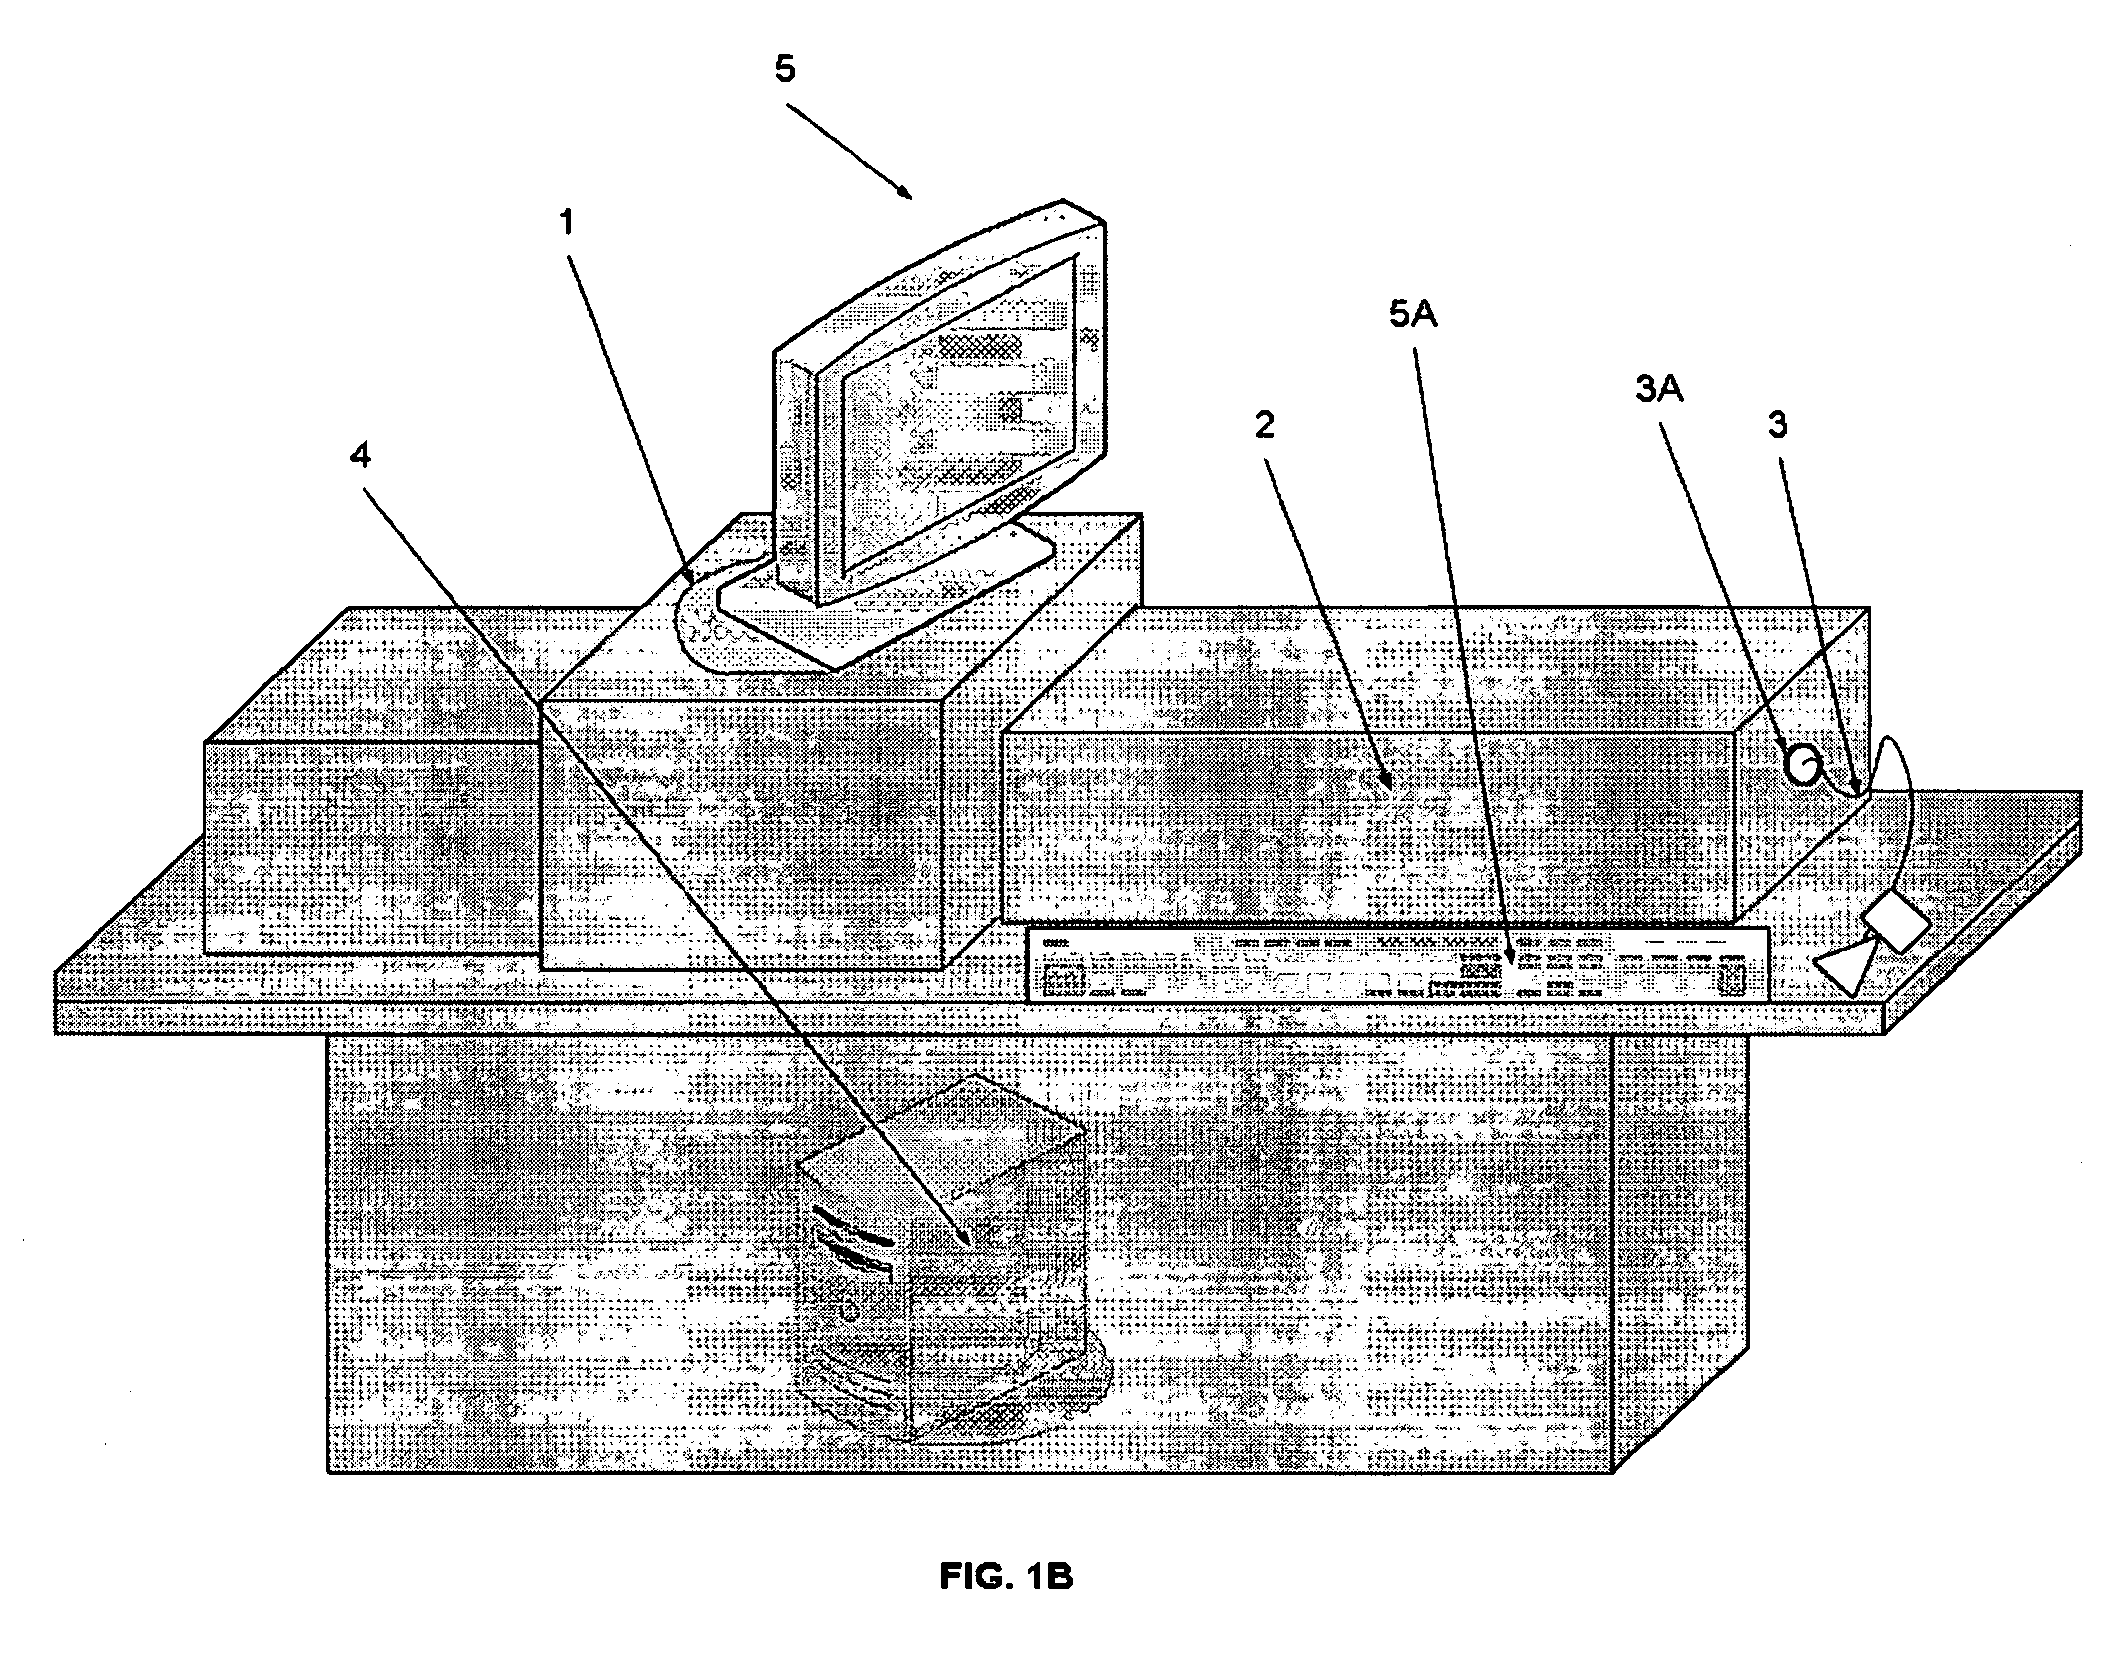 Medical simulation device with motion detector